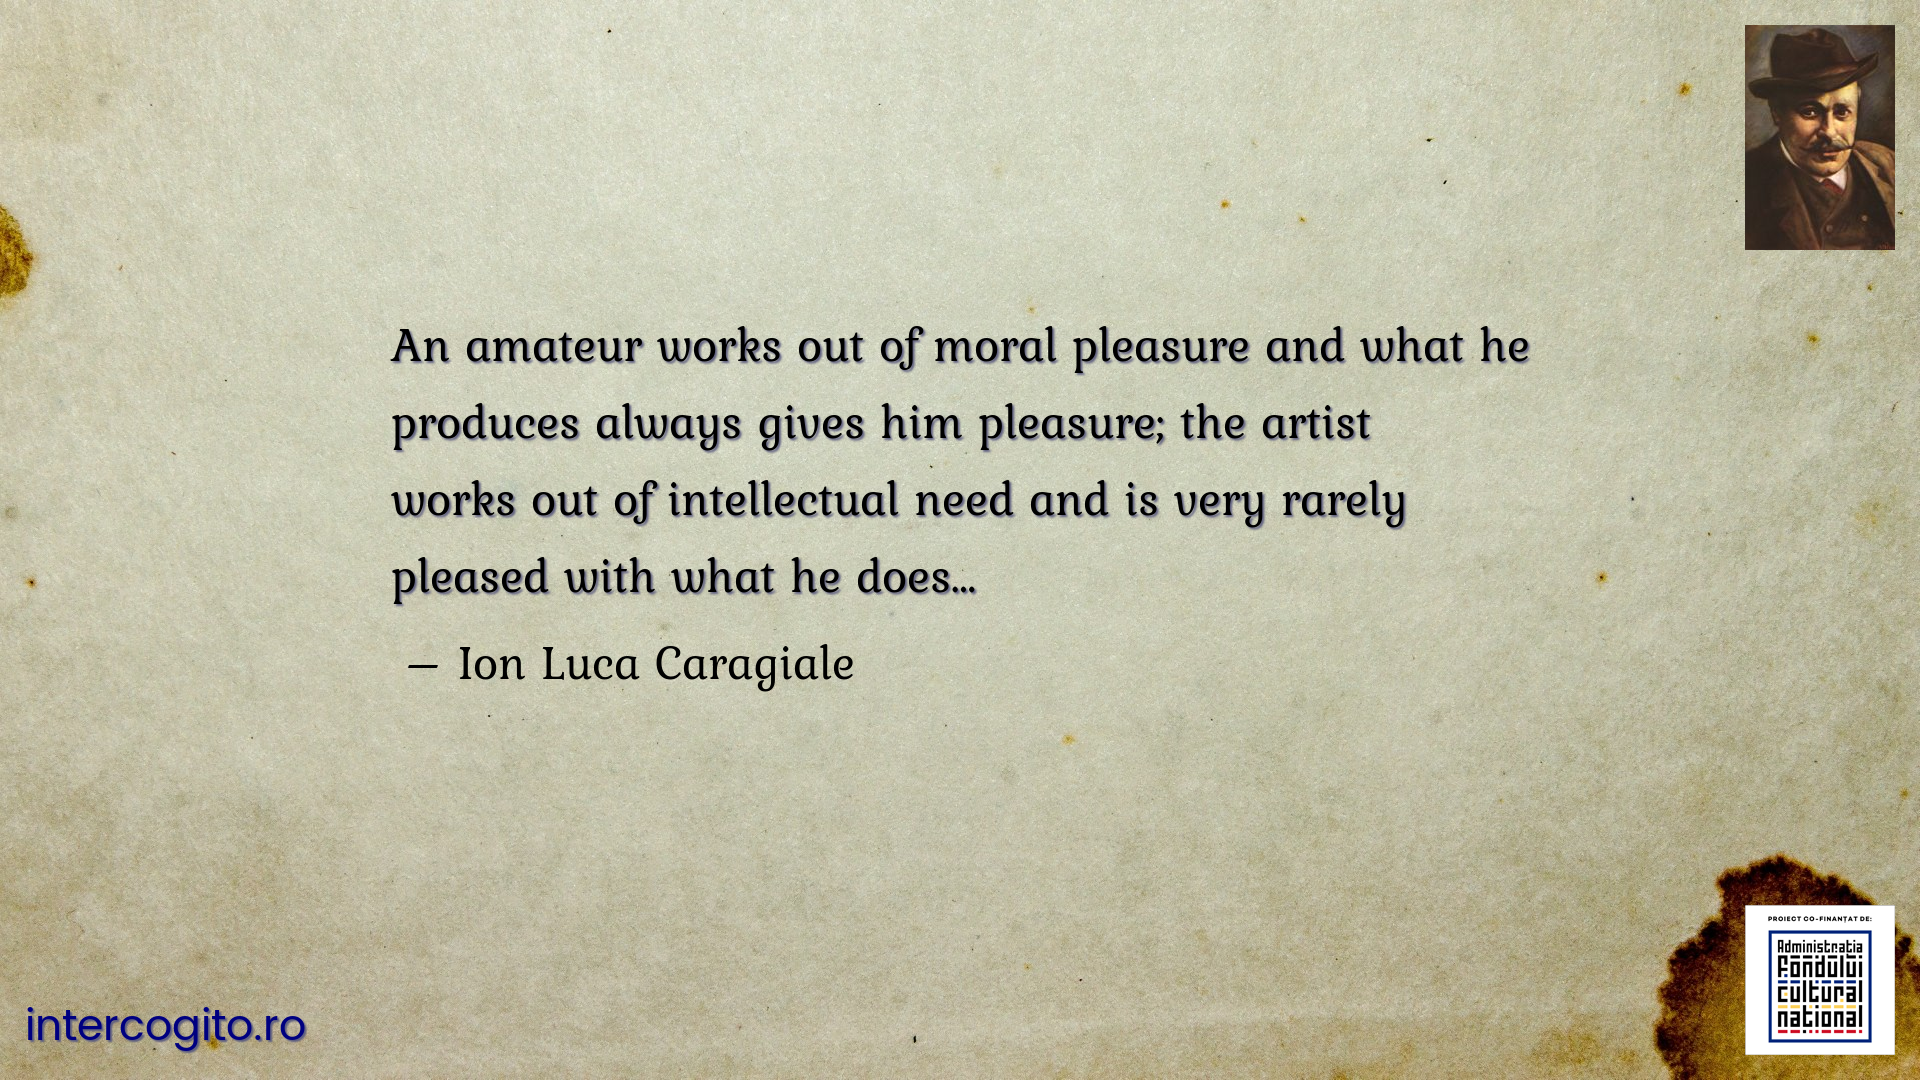 An amateur works out of moral pleasure and what he produces always gives him pleasure; the artist works out of intellectual need and is very rarely pleased with what he does…